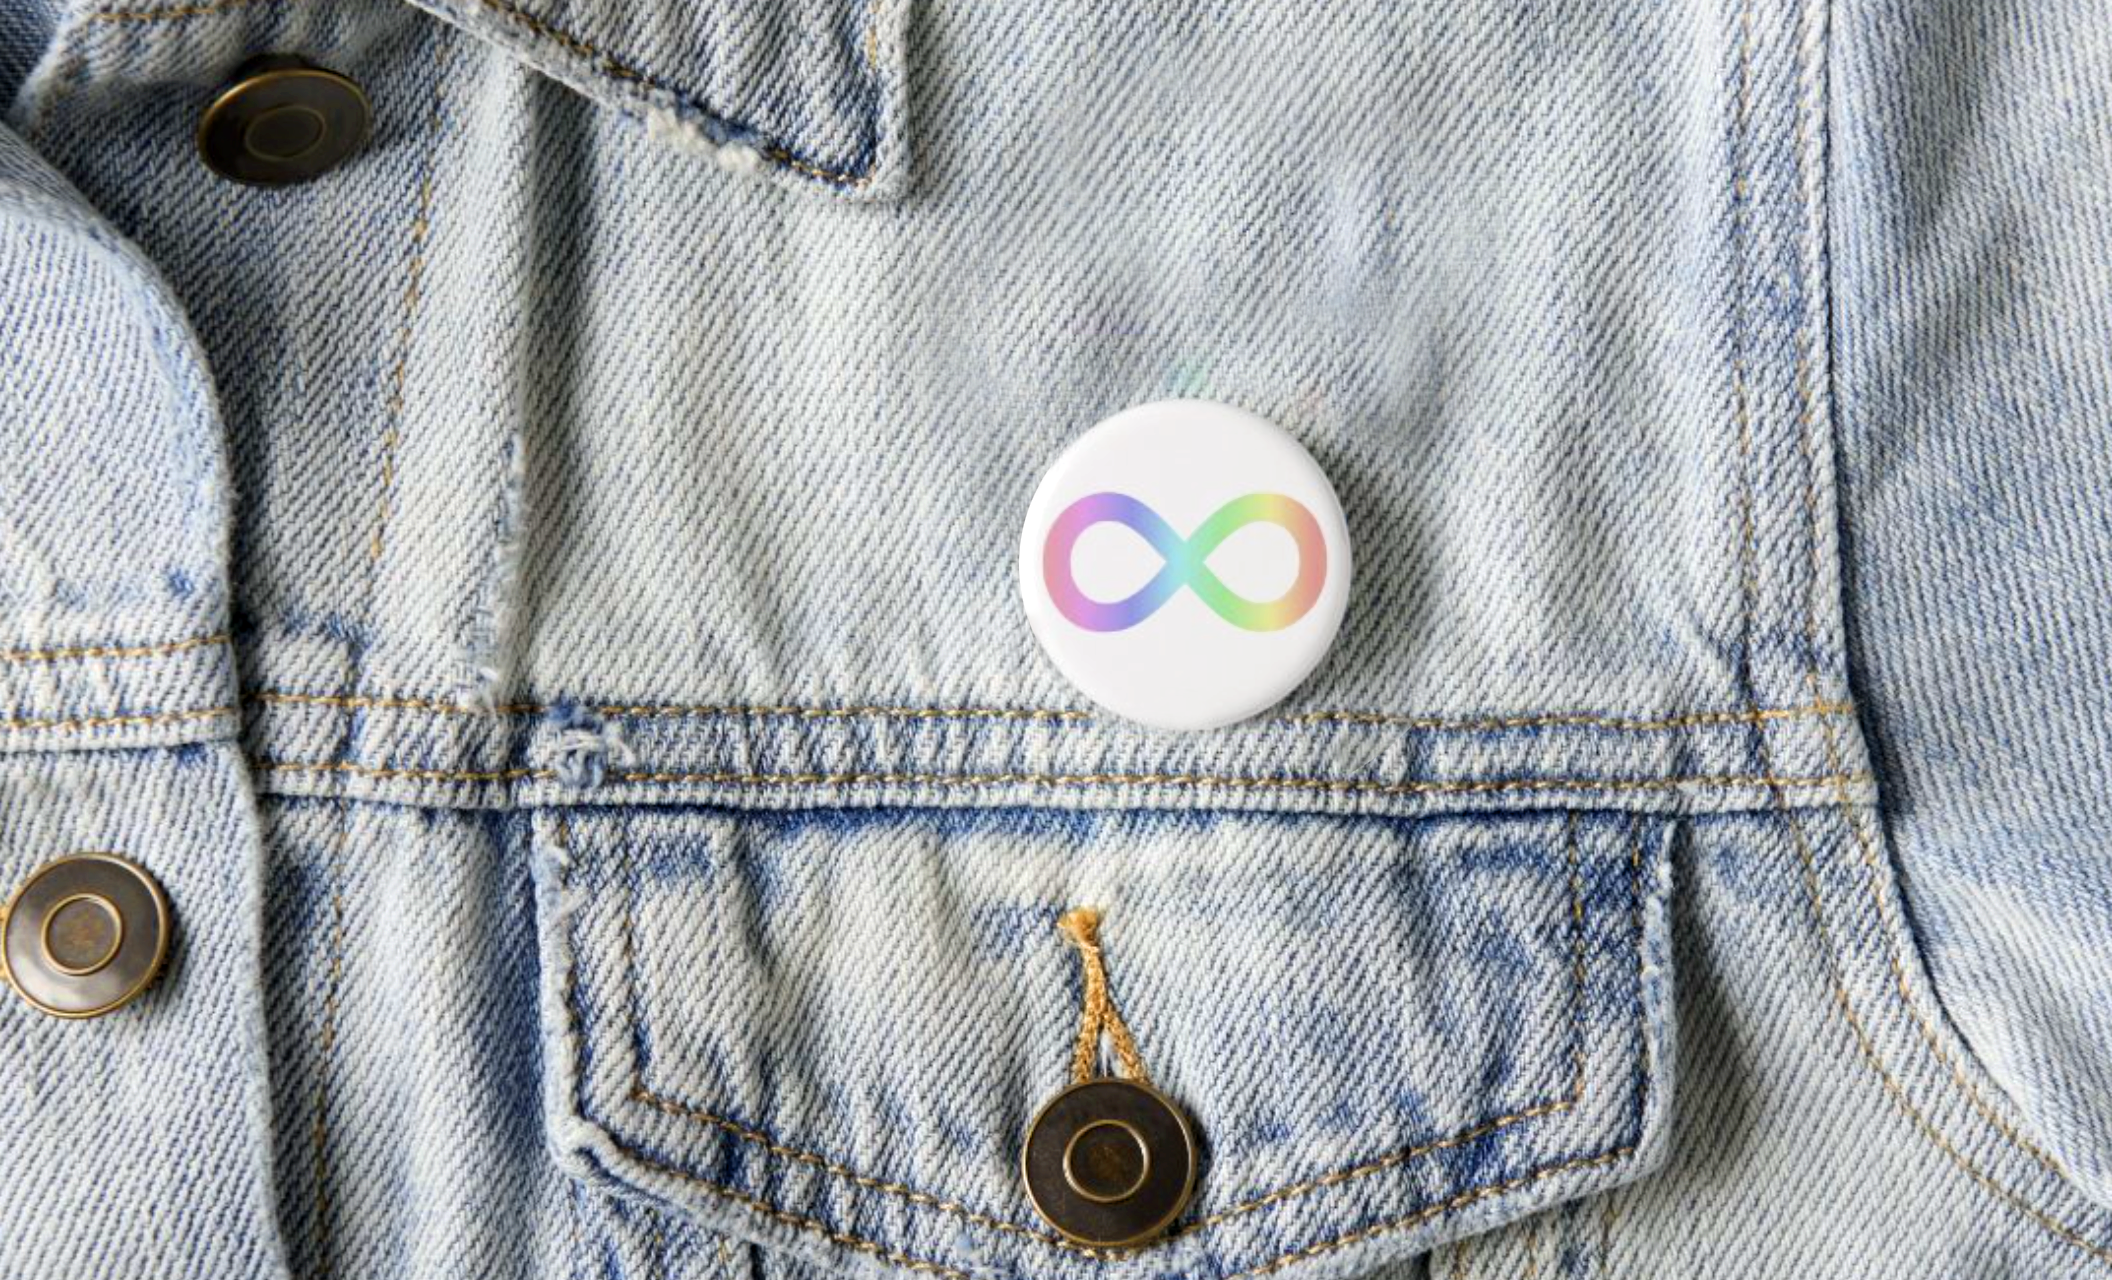 The Neurodiversity Symbol: What Is It and What Does it Mean?